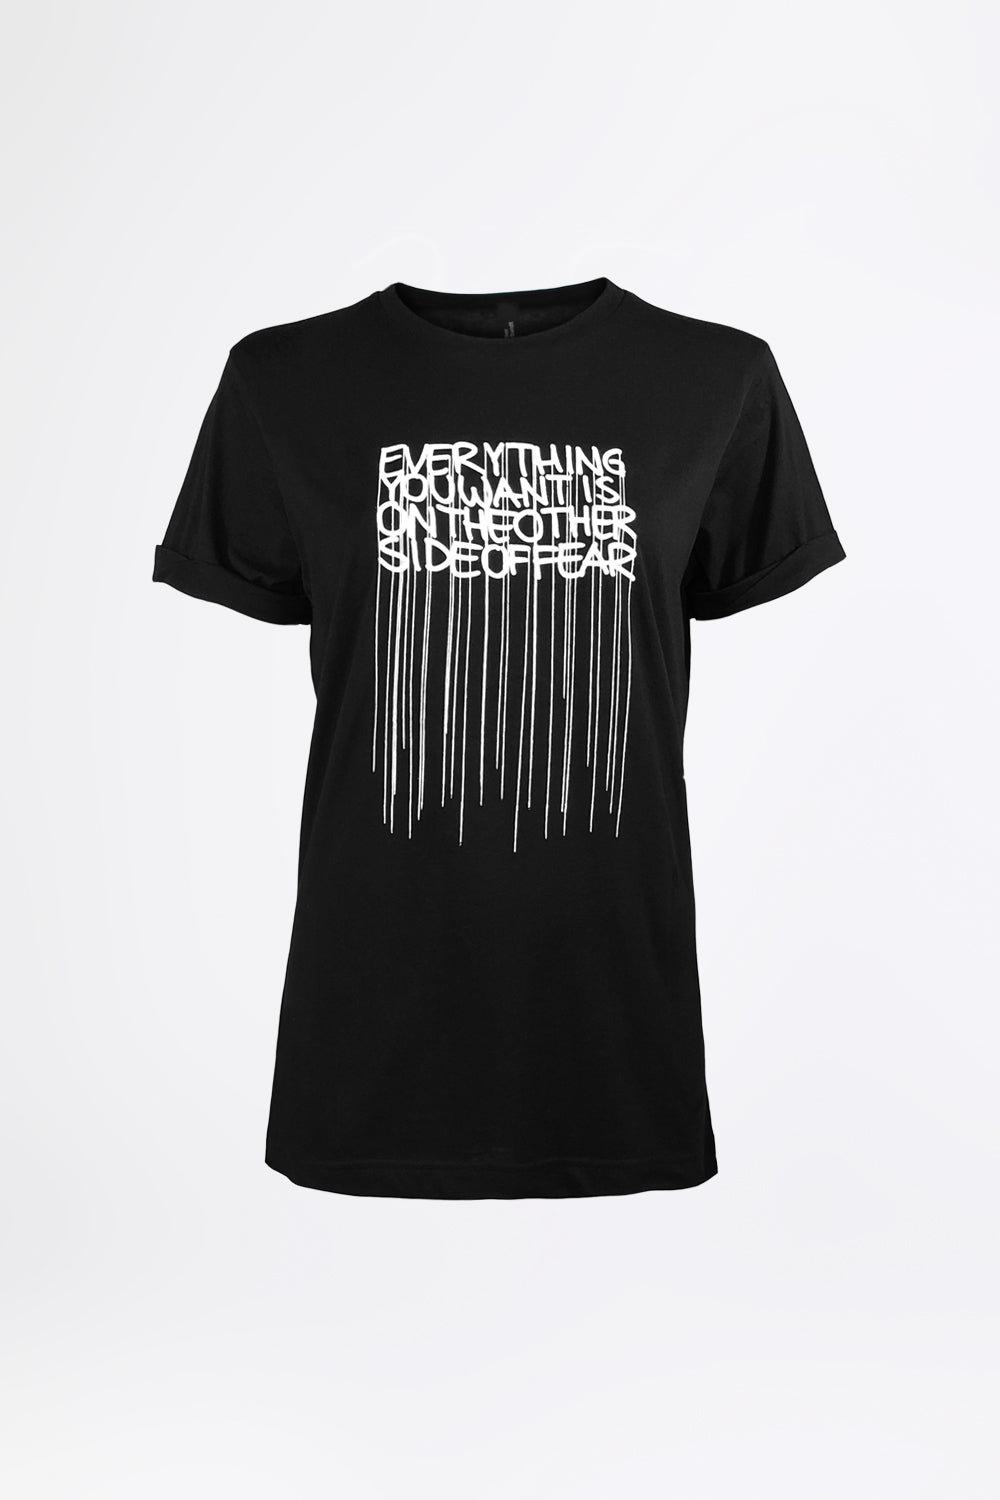 OTHER SIDE OF FEAR - Statement T-Shirt - Men